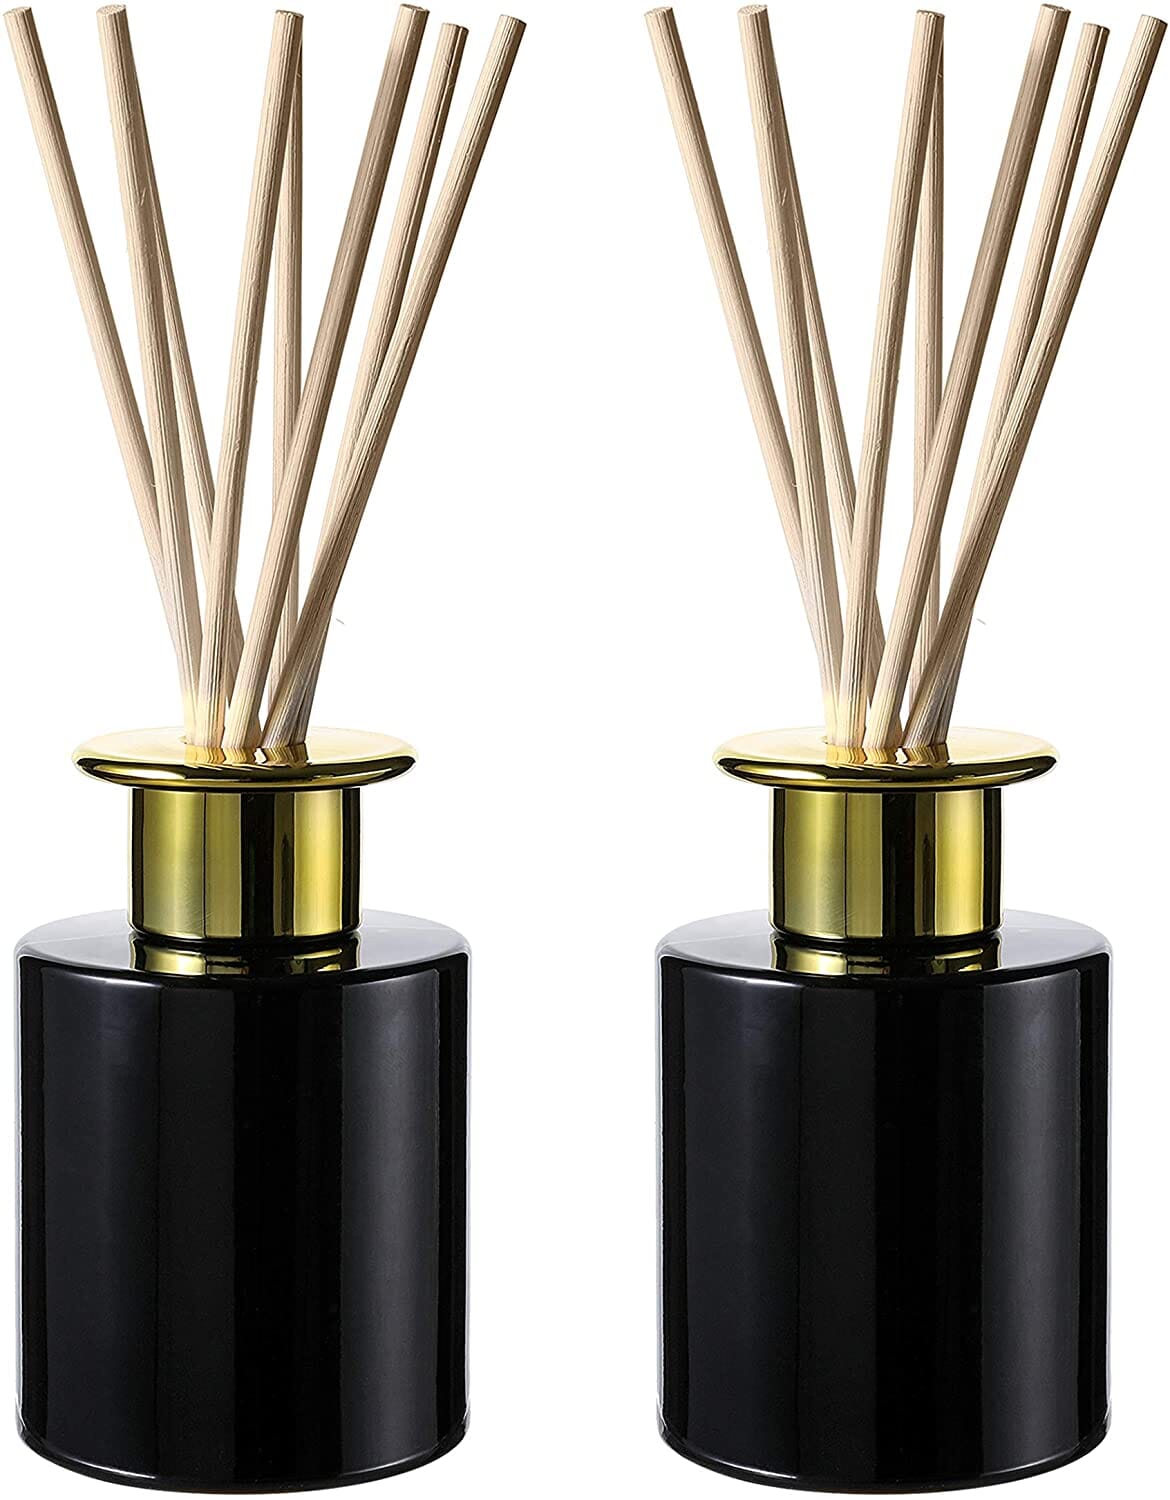 4 Ounce Black Glass Diffuser Bottles with 16pcs Natural Reed Sticks & Gold Caps,Set of 2